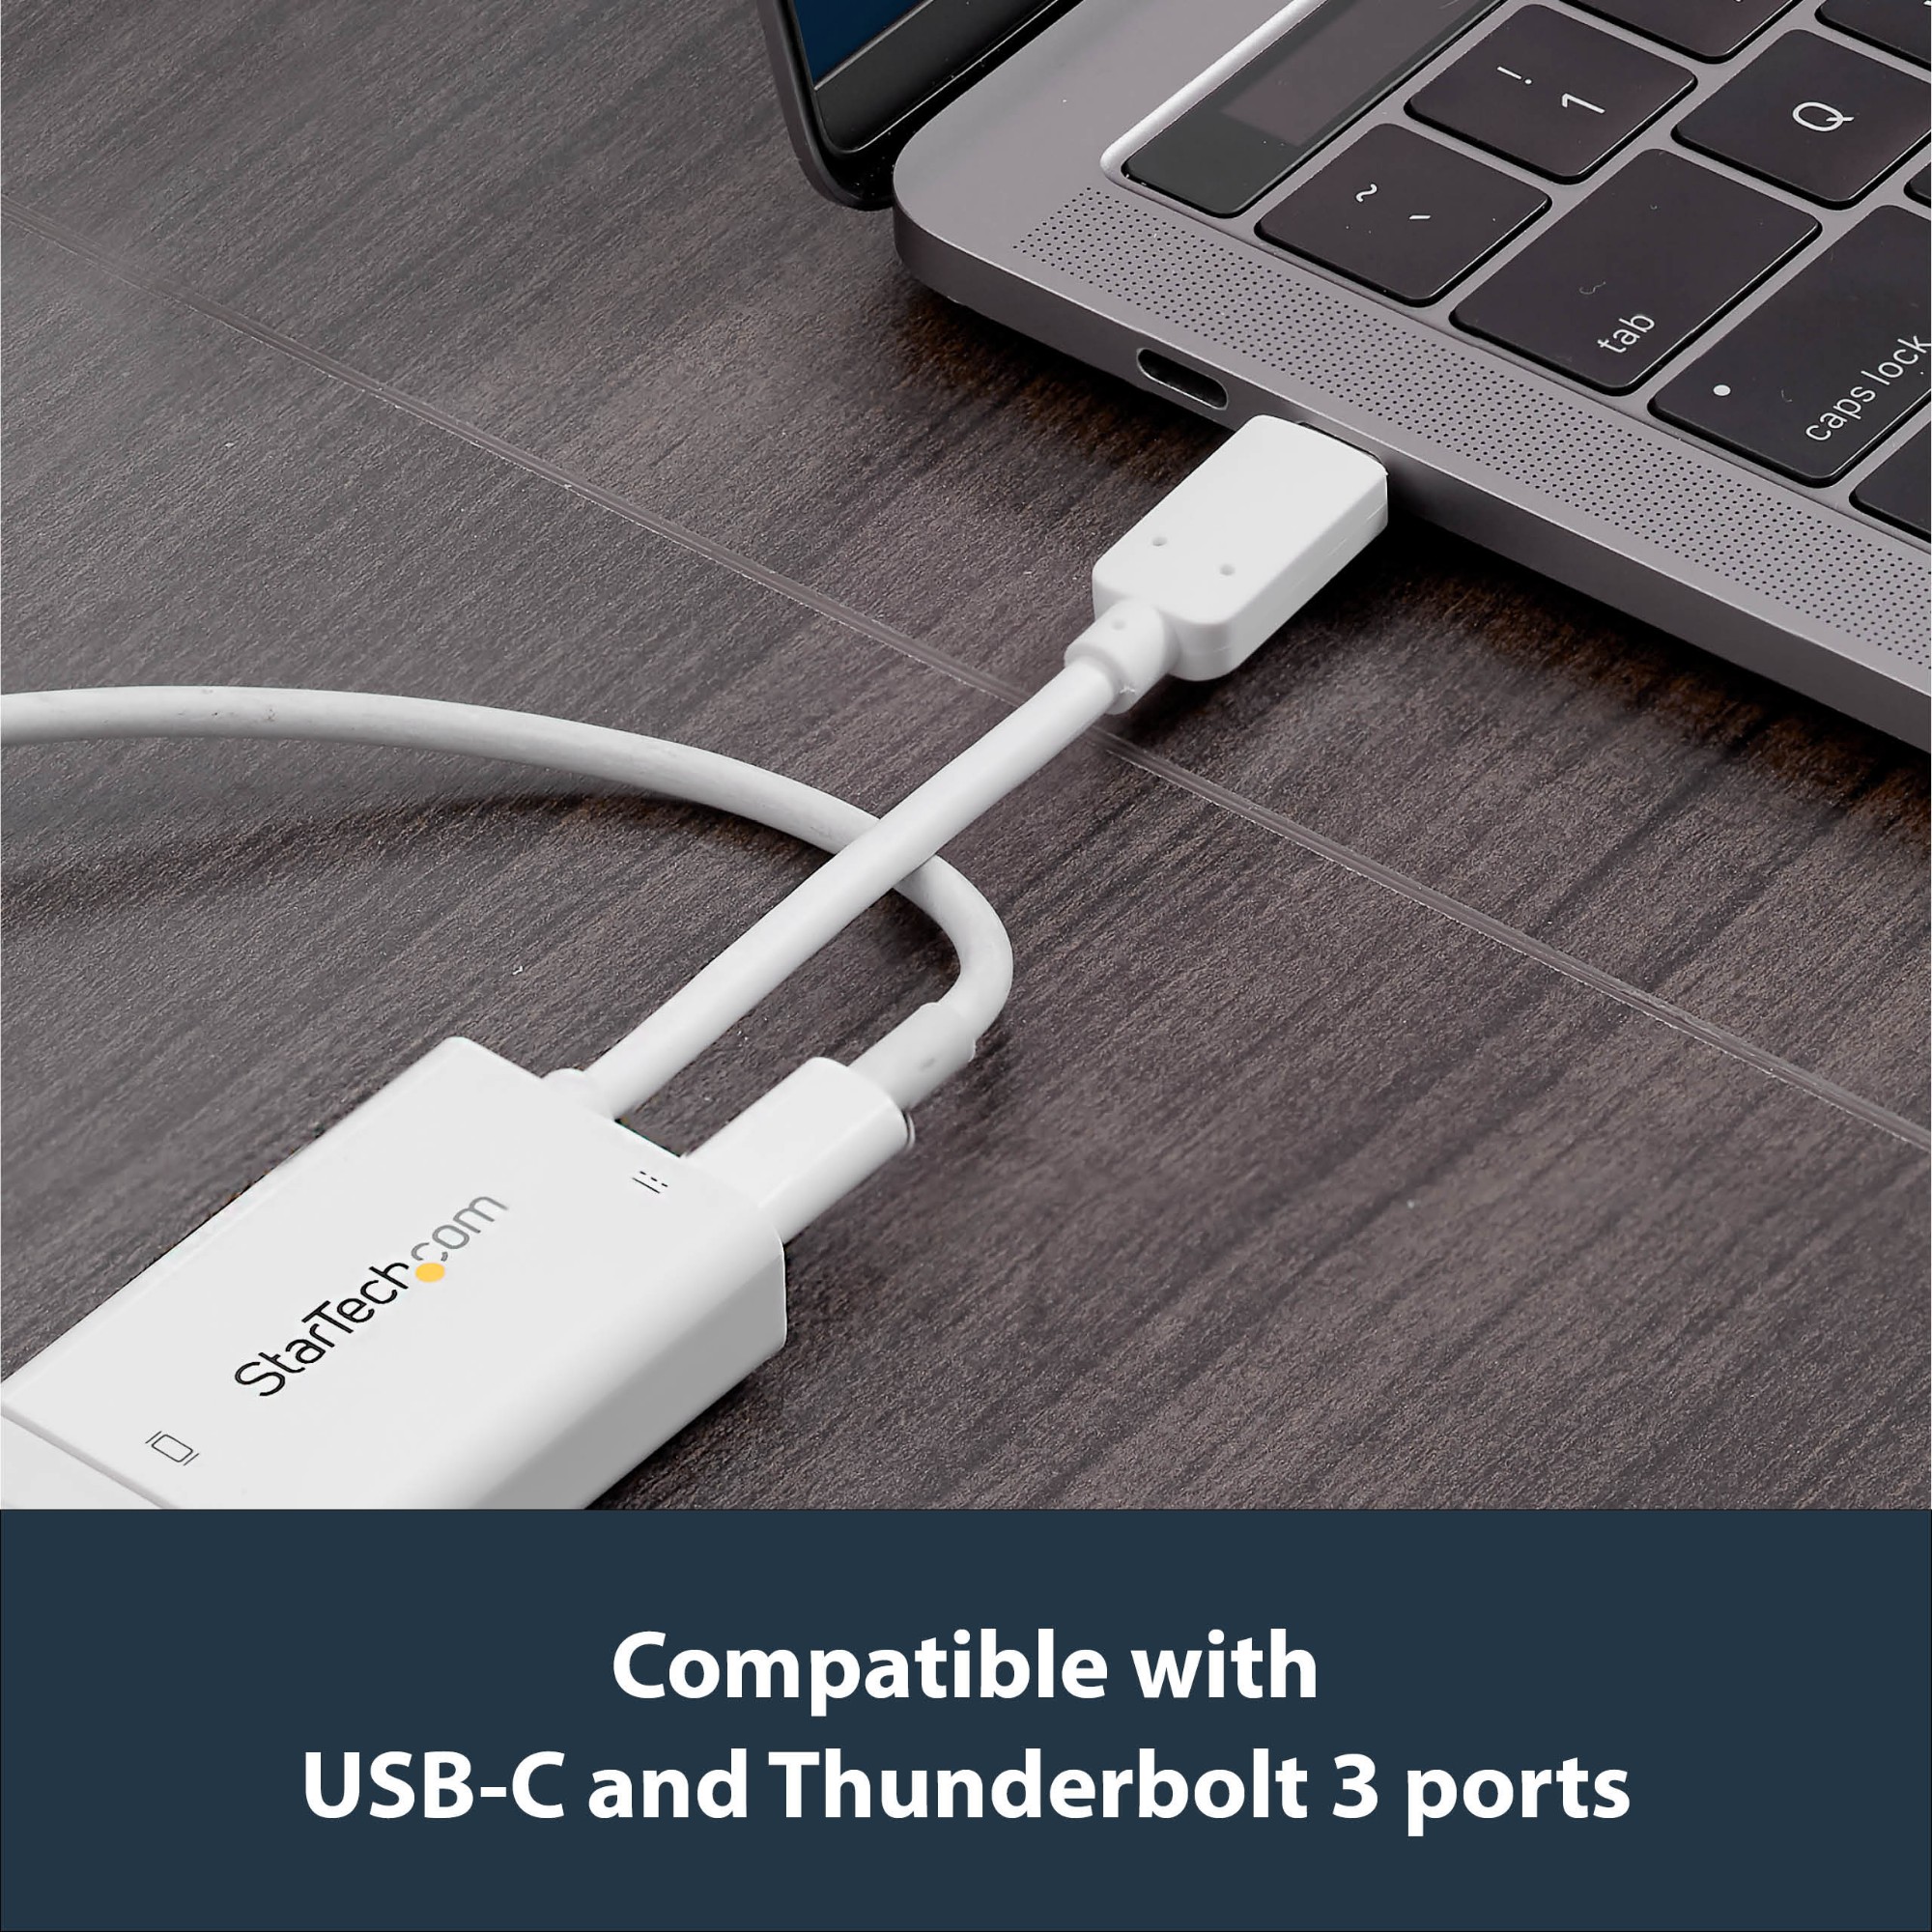 StarTech.com USB C to VGA Adapter with Power Delivery - 1080p USB Type-C to VGA Monitor Video Converter w/ Charging - 60W PD Pass-Through - Thunderbolt 3 Compatible - White